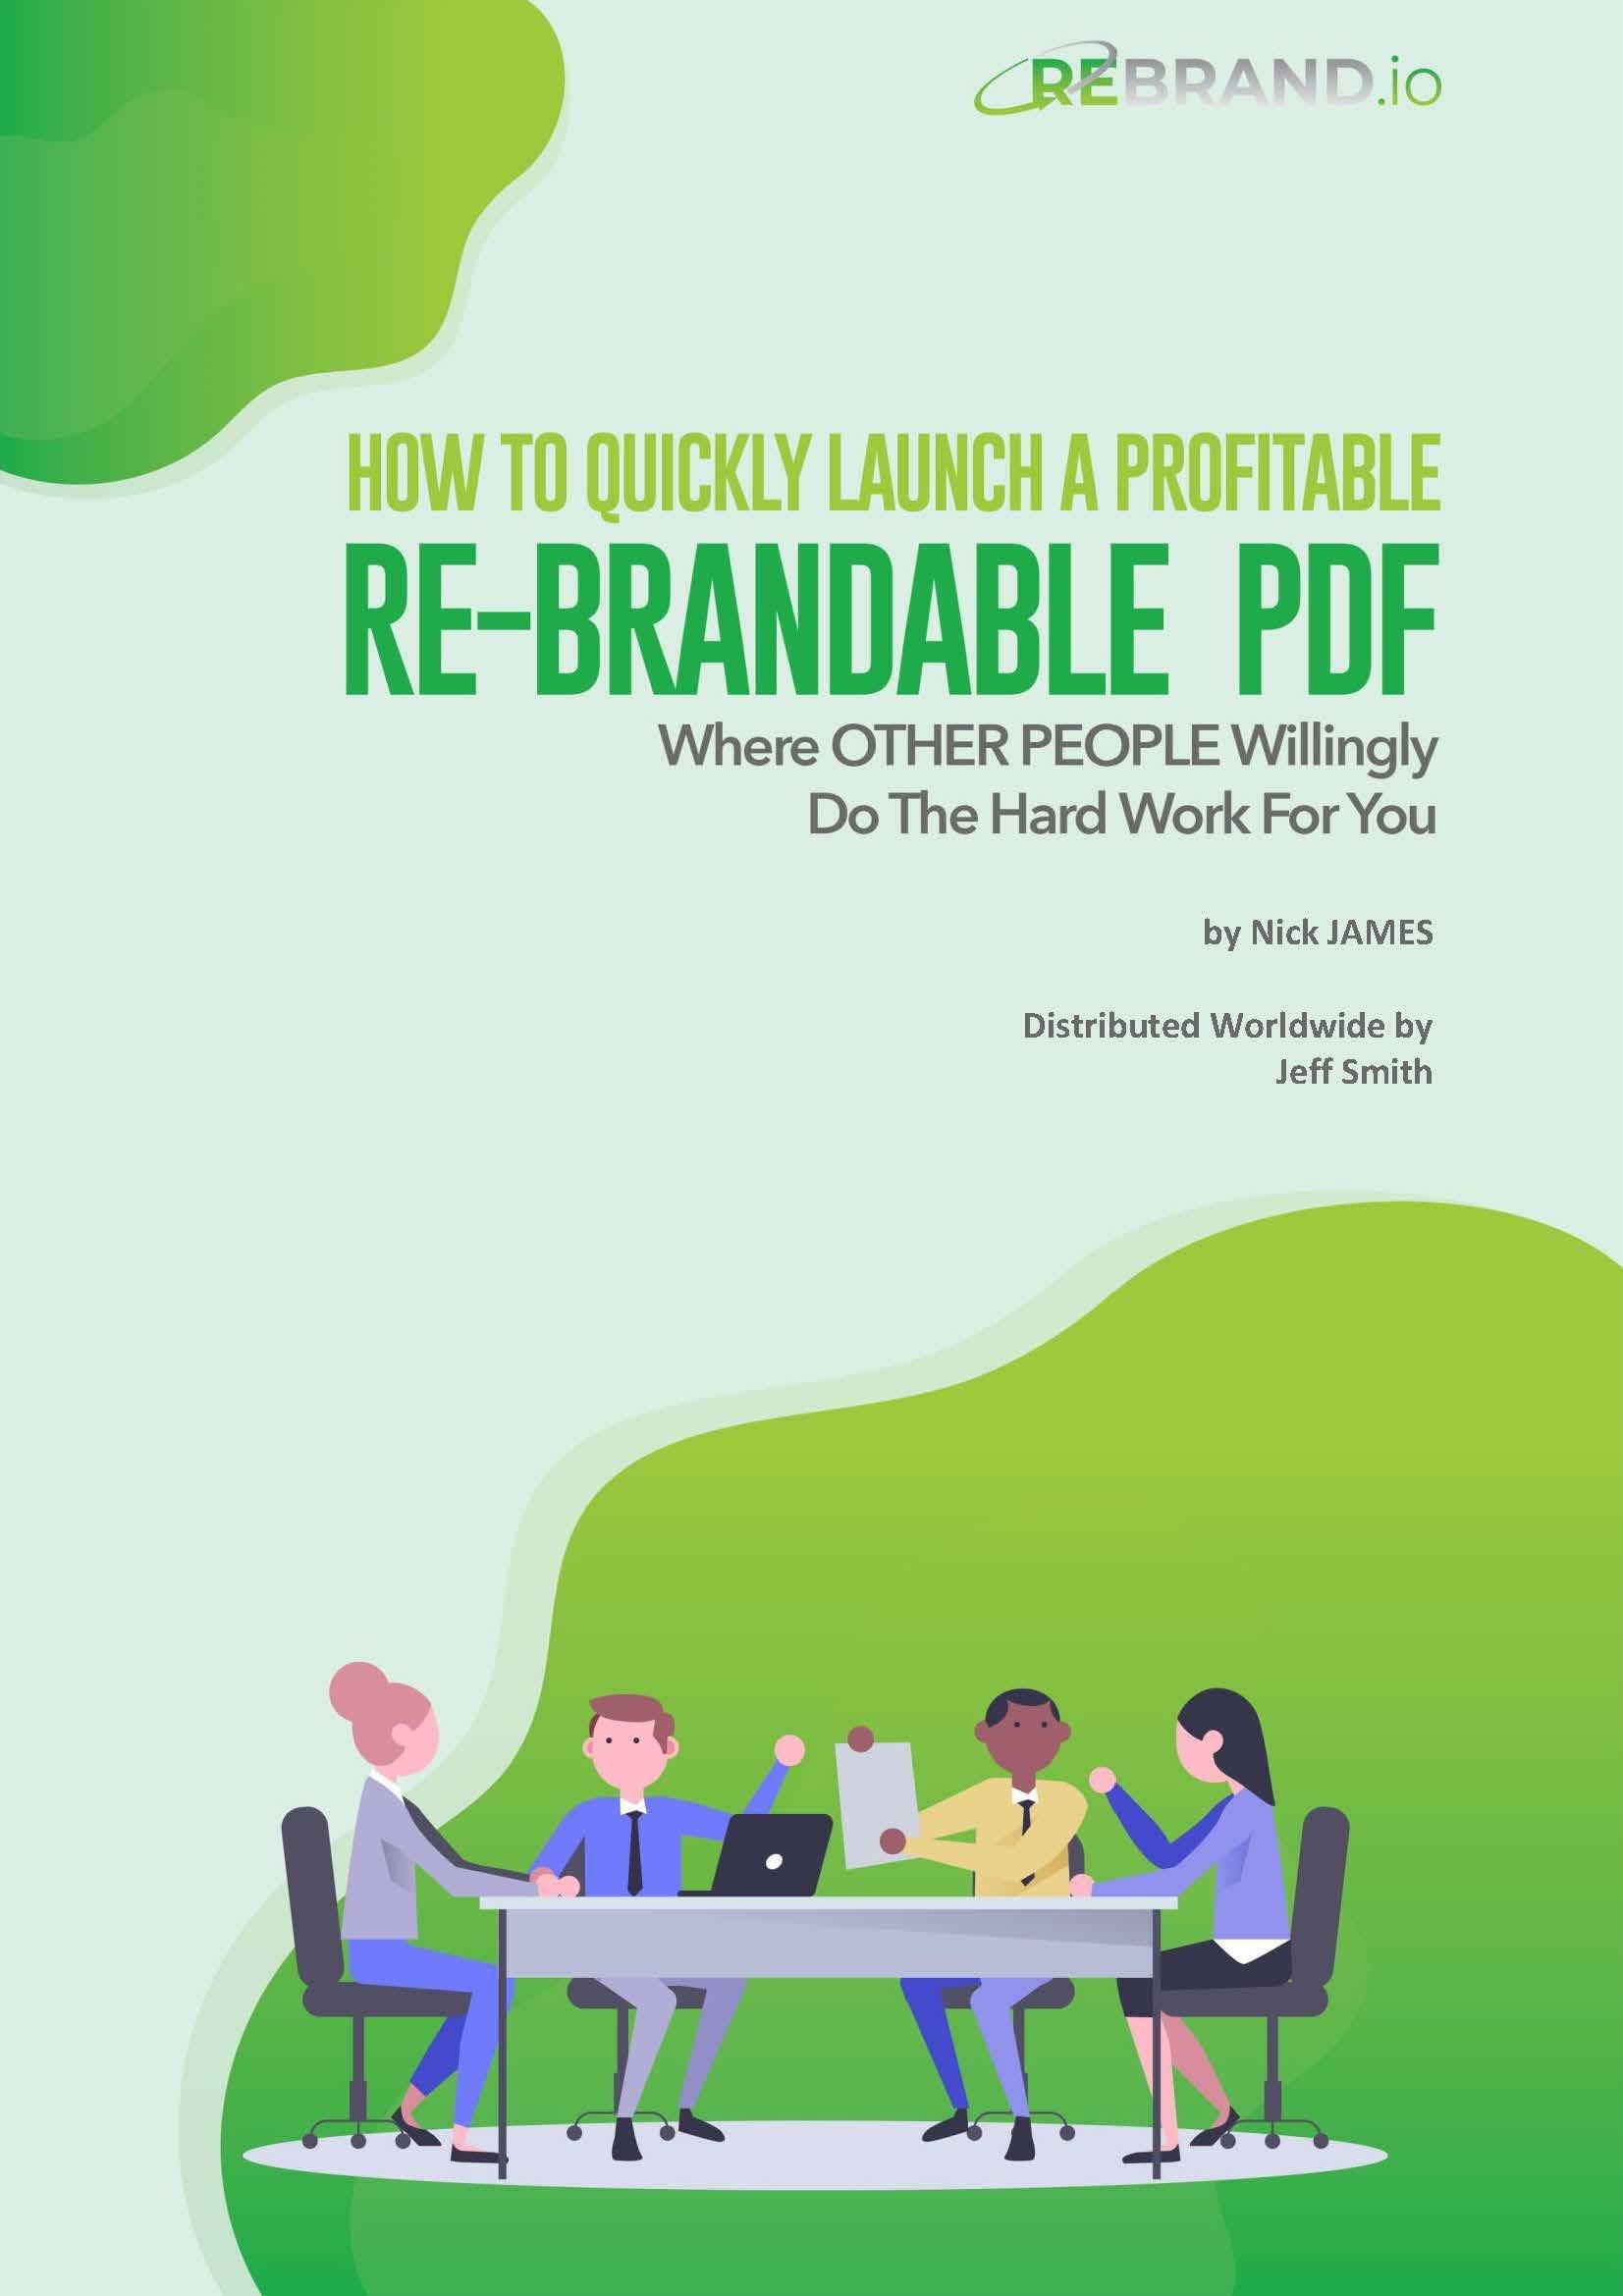 How to quickly launch a Profitable Re-Brandable PDF